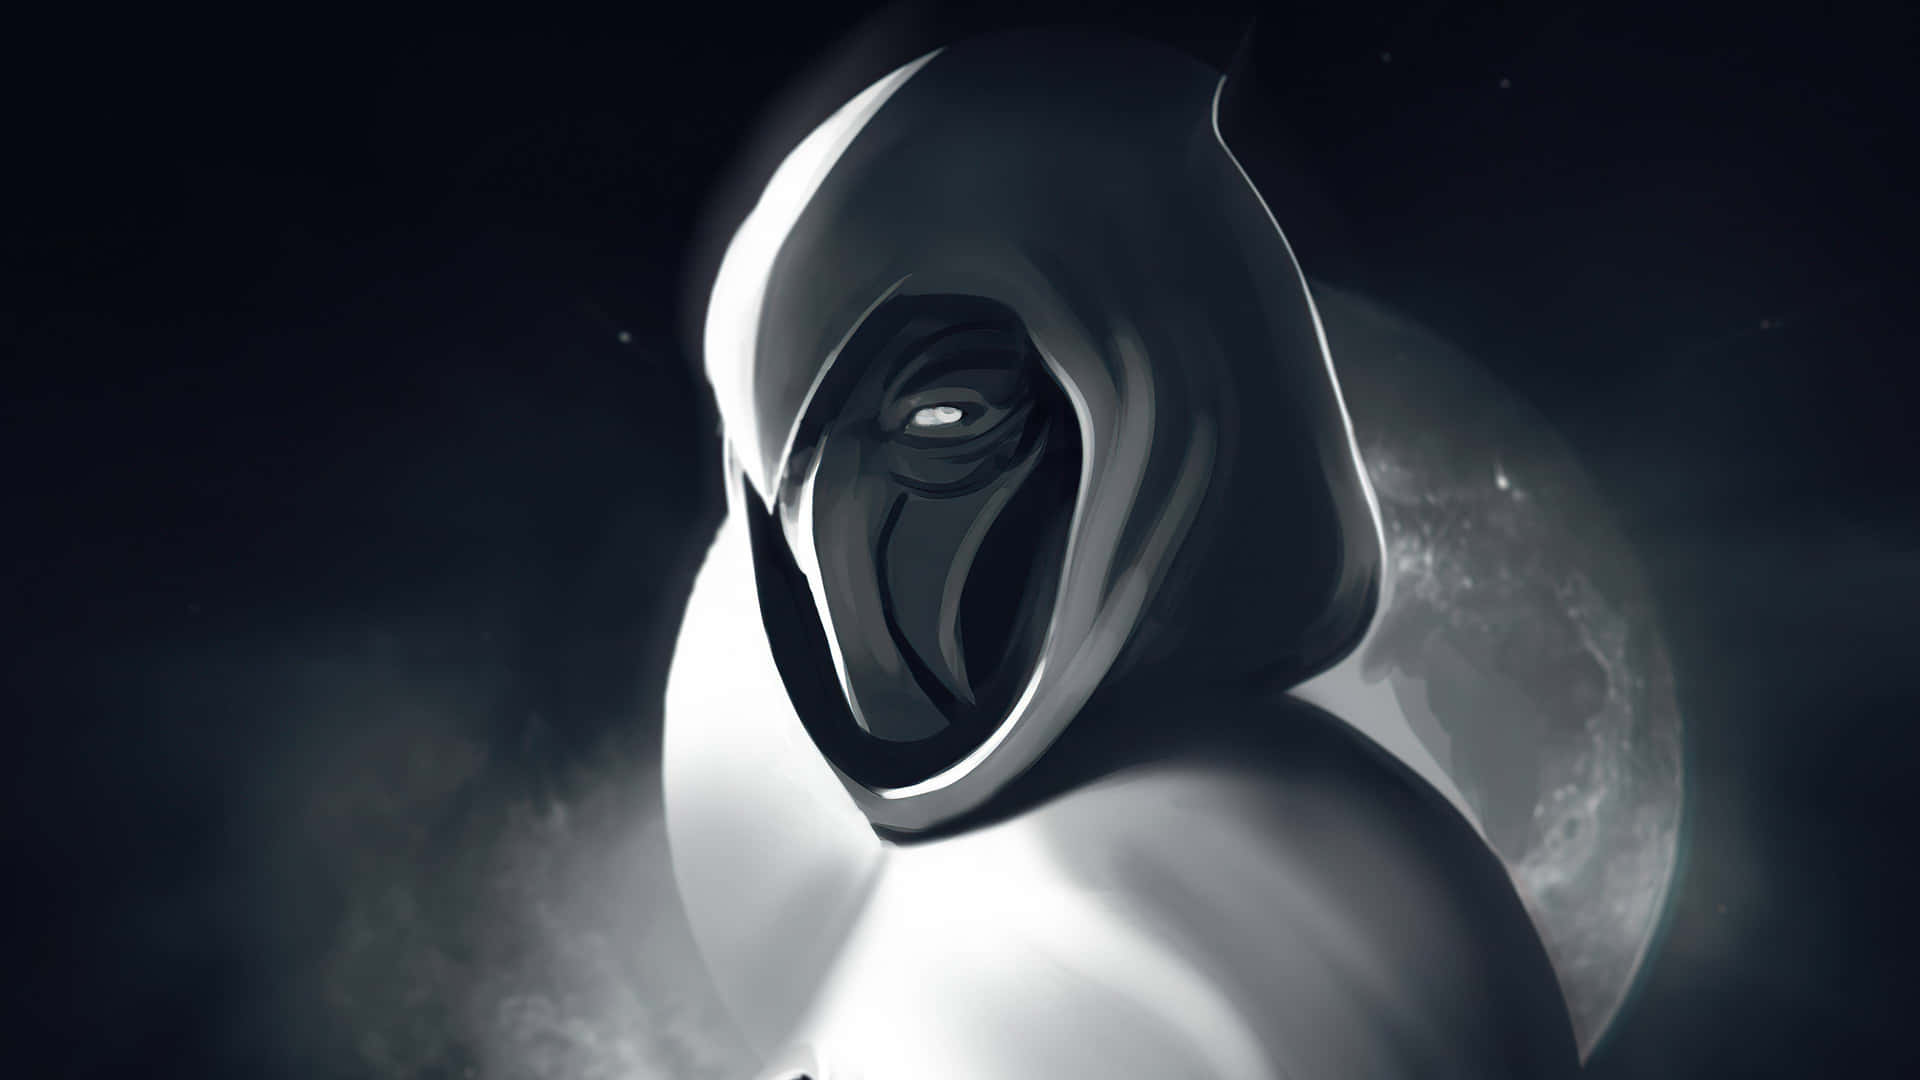 The Minimalist Moon Knight Stands Ready for Action Wallpaper